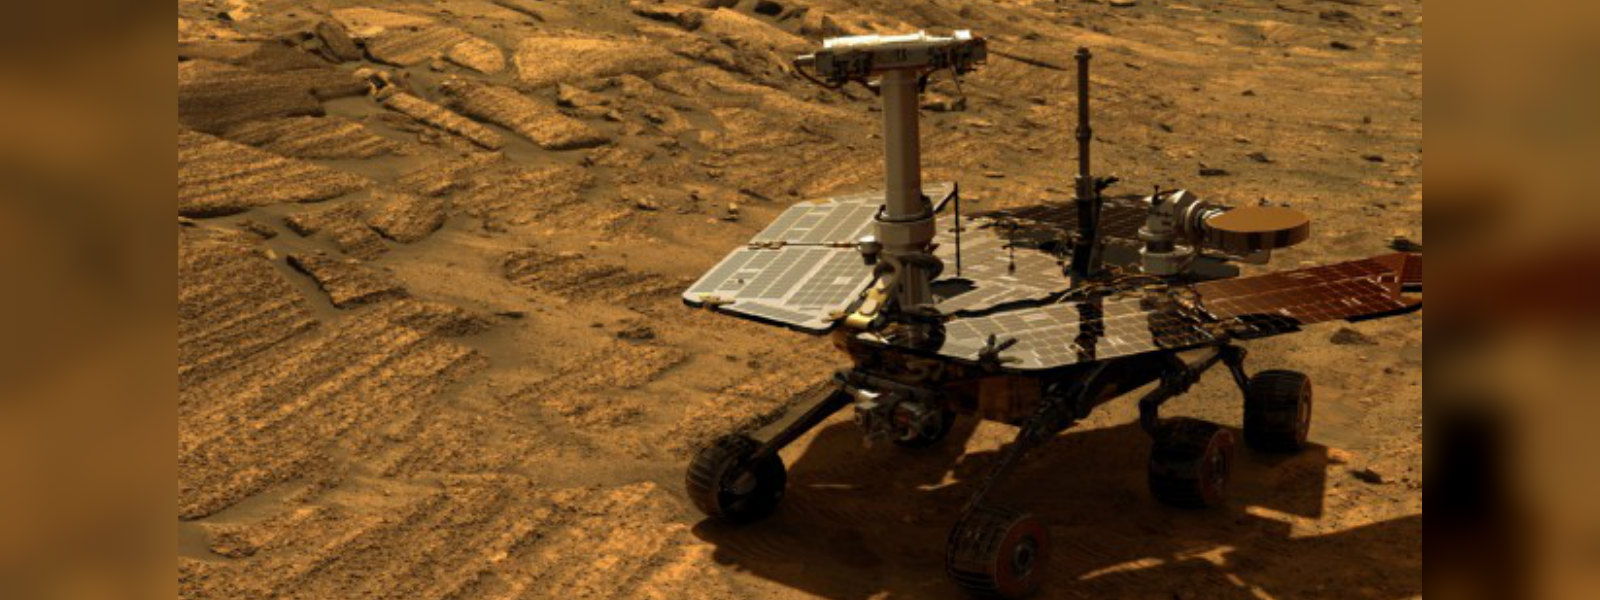 Mars Opportunity rover ends 15-year mission